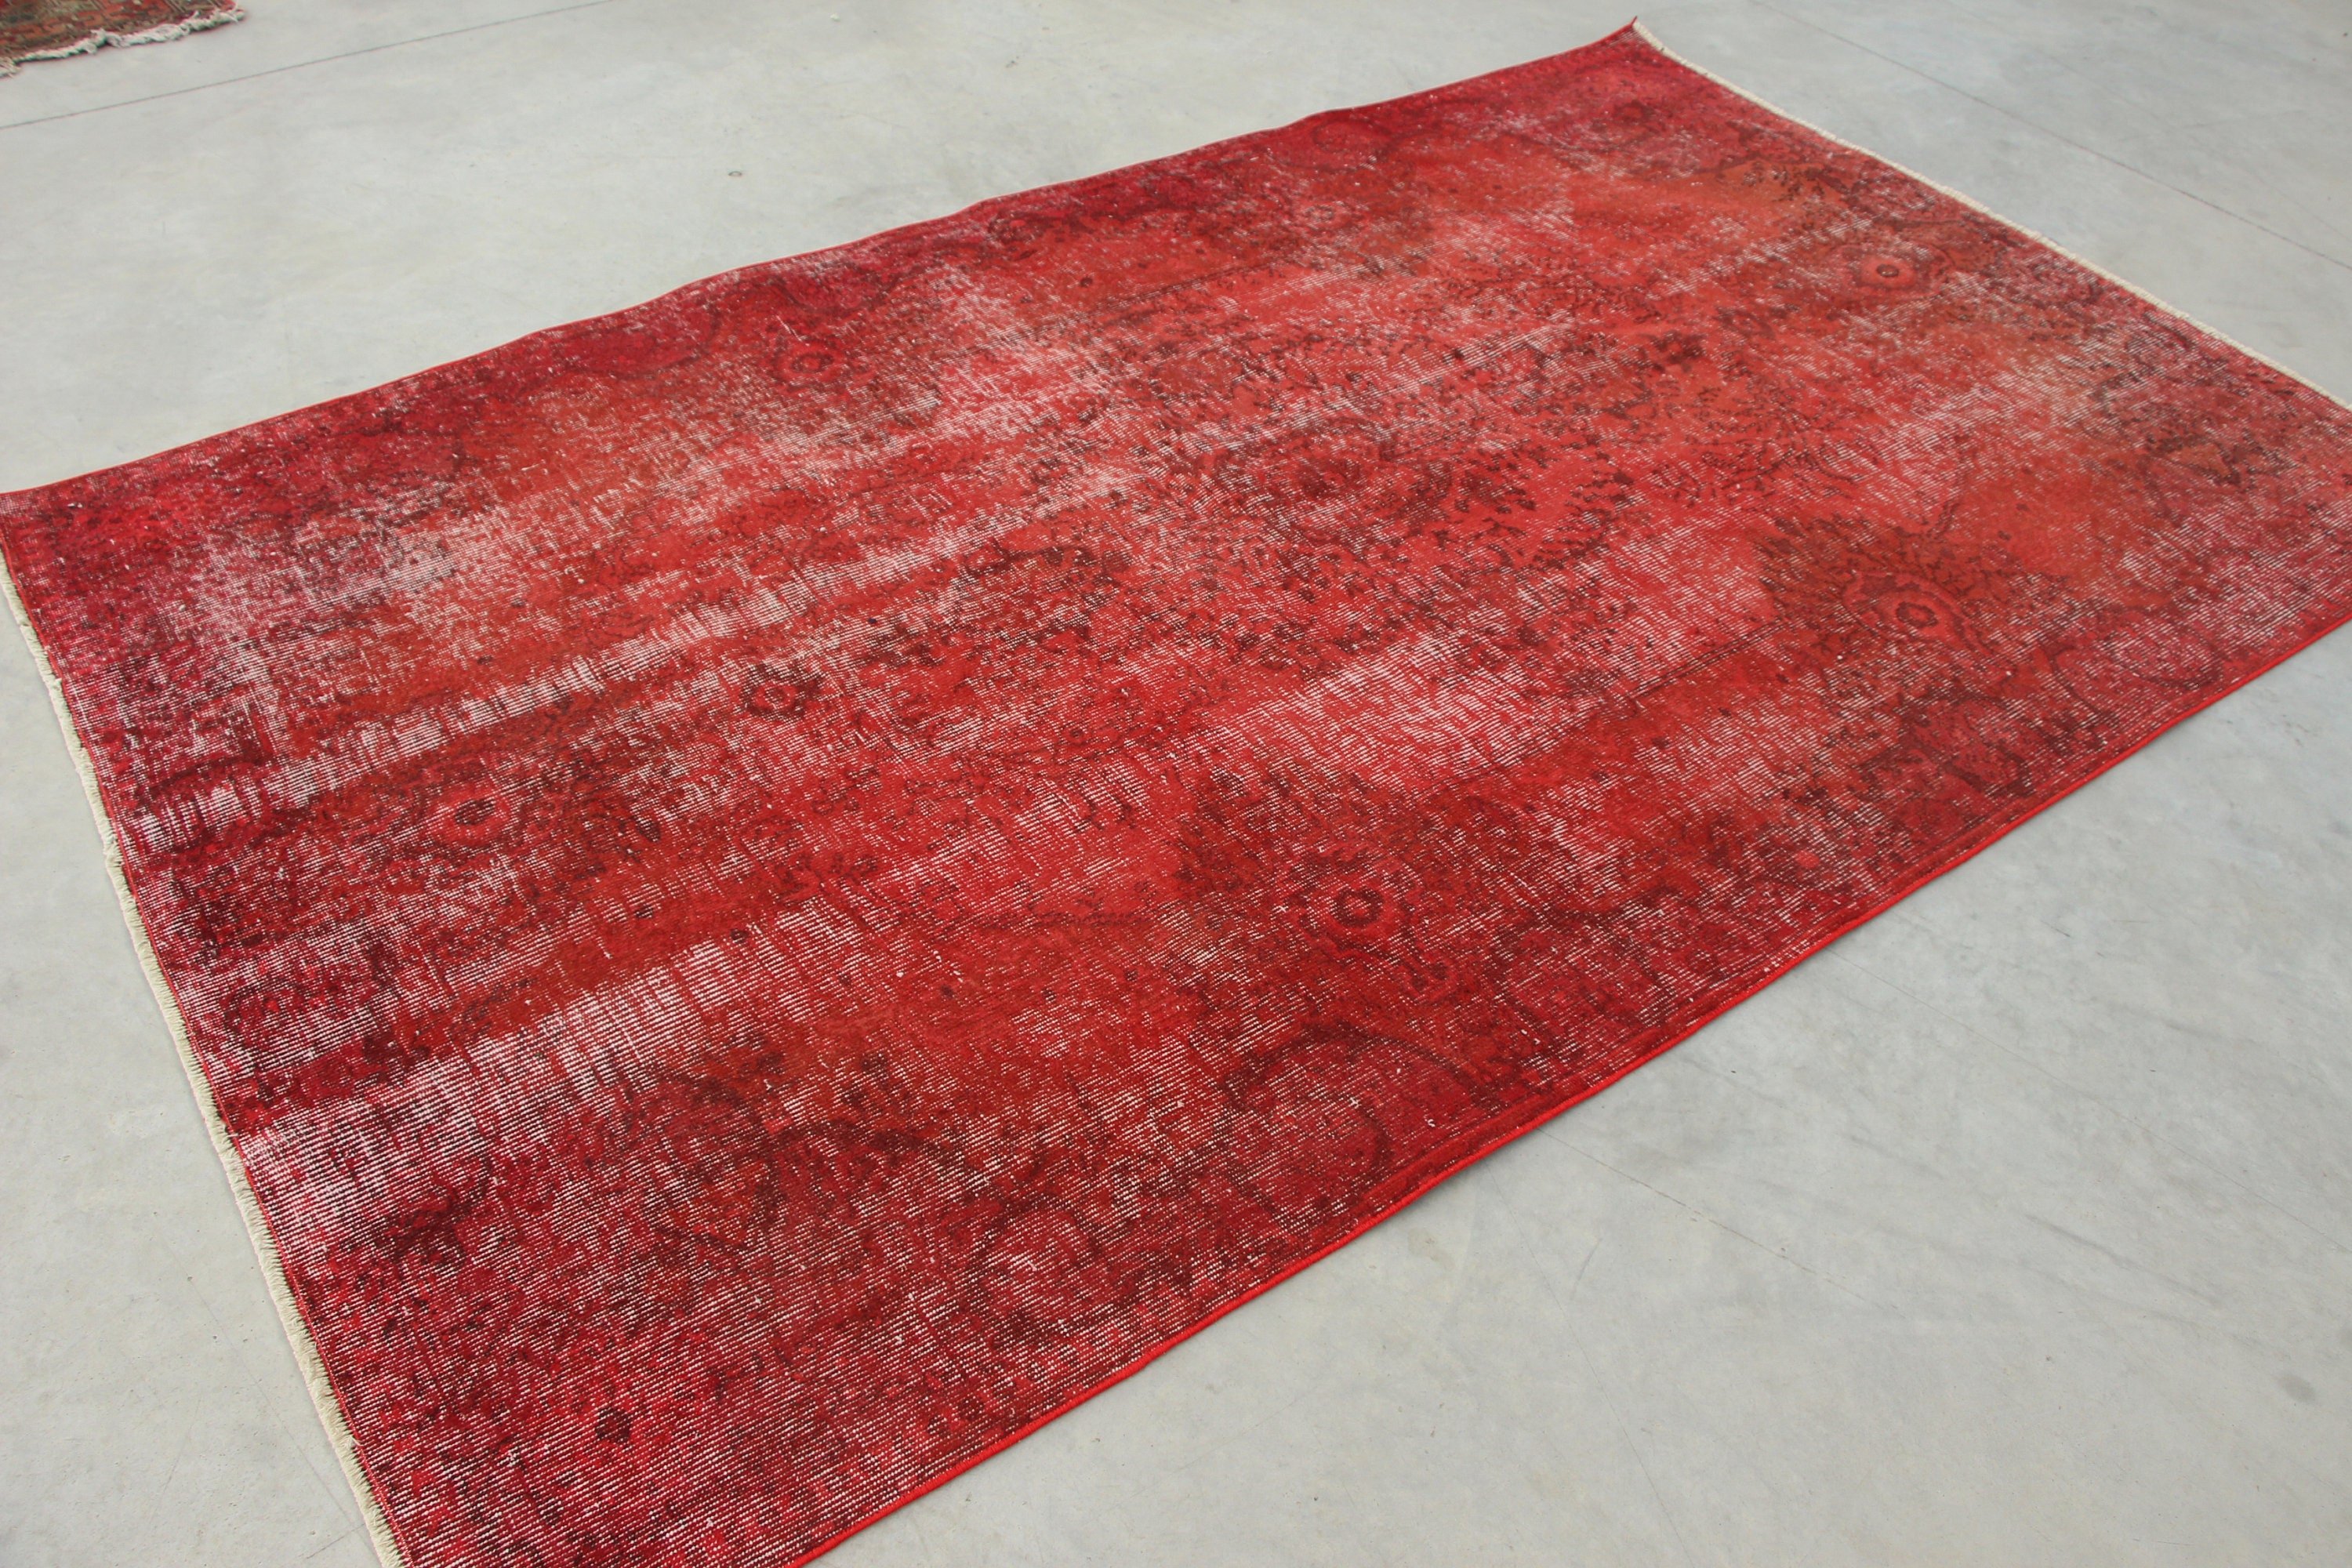 Red Wool Rugs, Turkish Rug, 5.4x8.9 ft Large Rug, Anatolian Rugs, Vintage Rug, Living Room Rugs, Salon Rug, Rugs for Salon, Kitchen Rugs